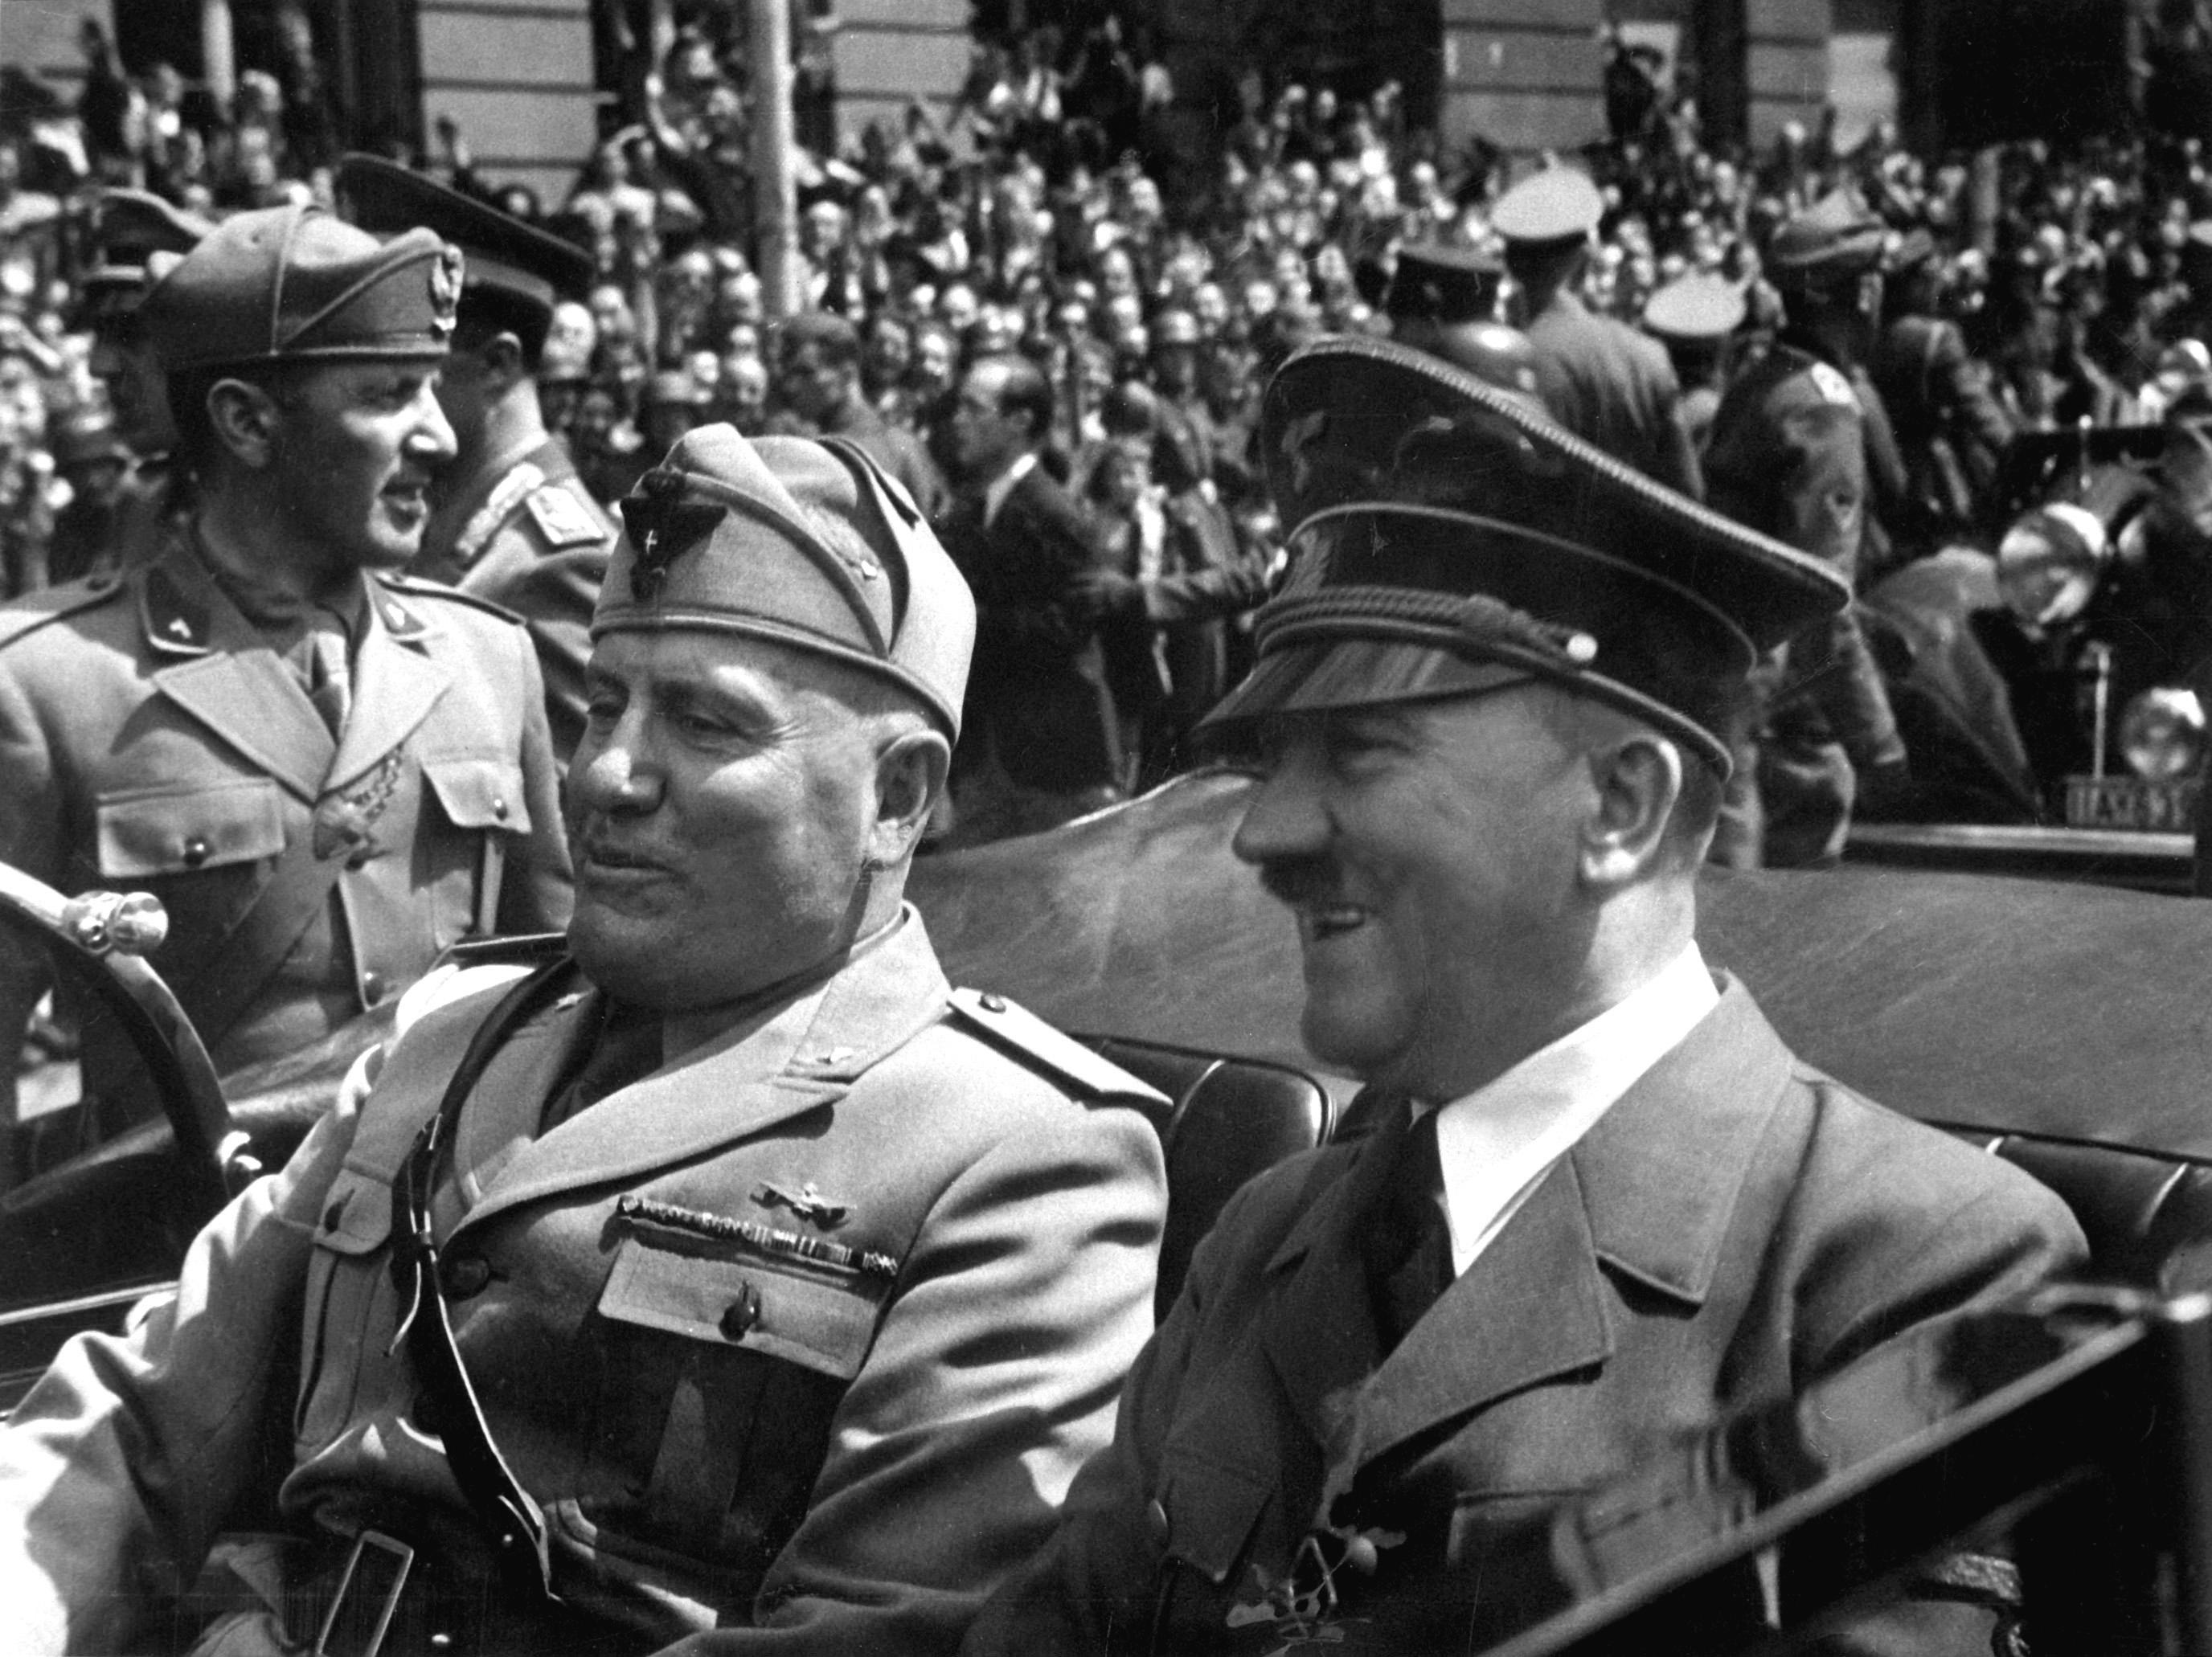 Benito Mussolini (left) and Adolf Hitler (right) riding through the streets of Munich, Germany, in 1940. Mussolini (Italy) and Hitler (Germany) formed an Axis in 1936.